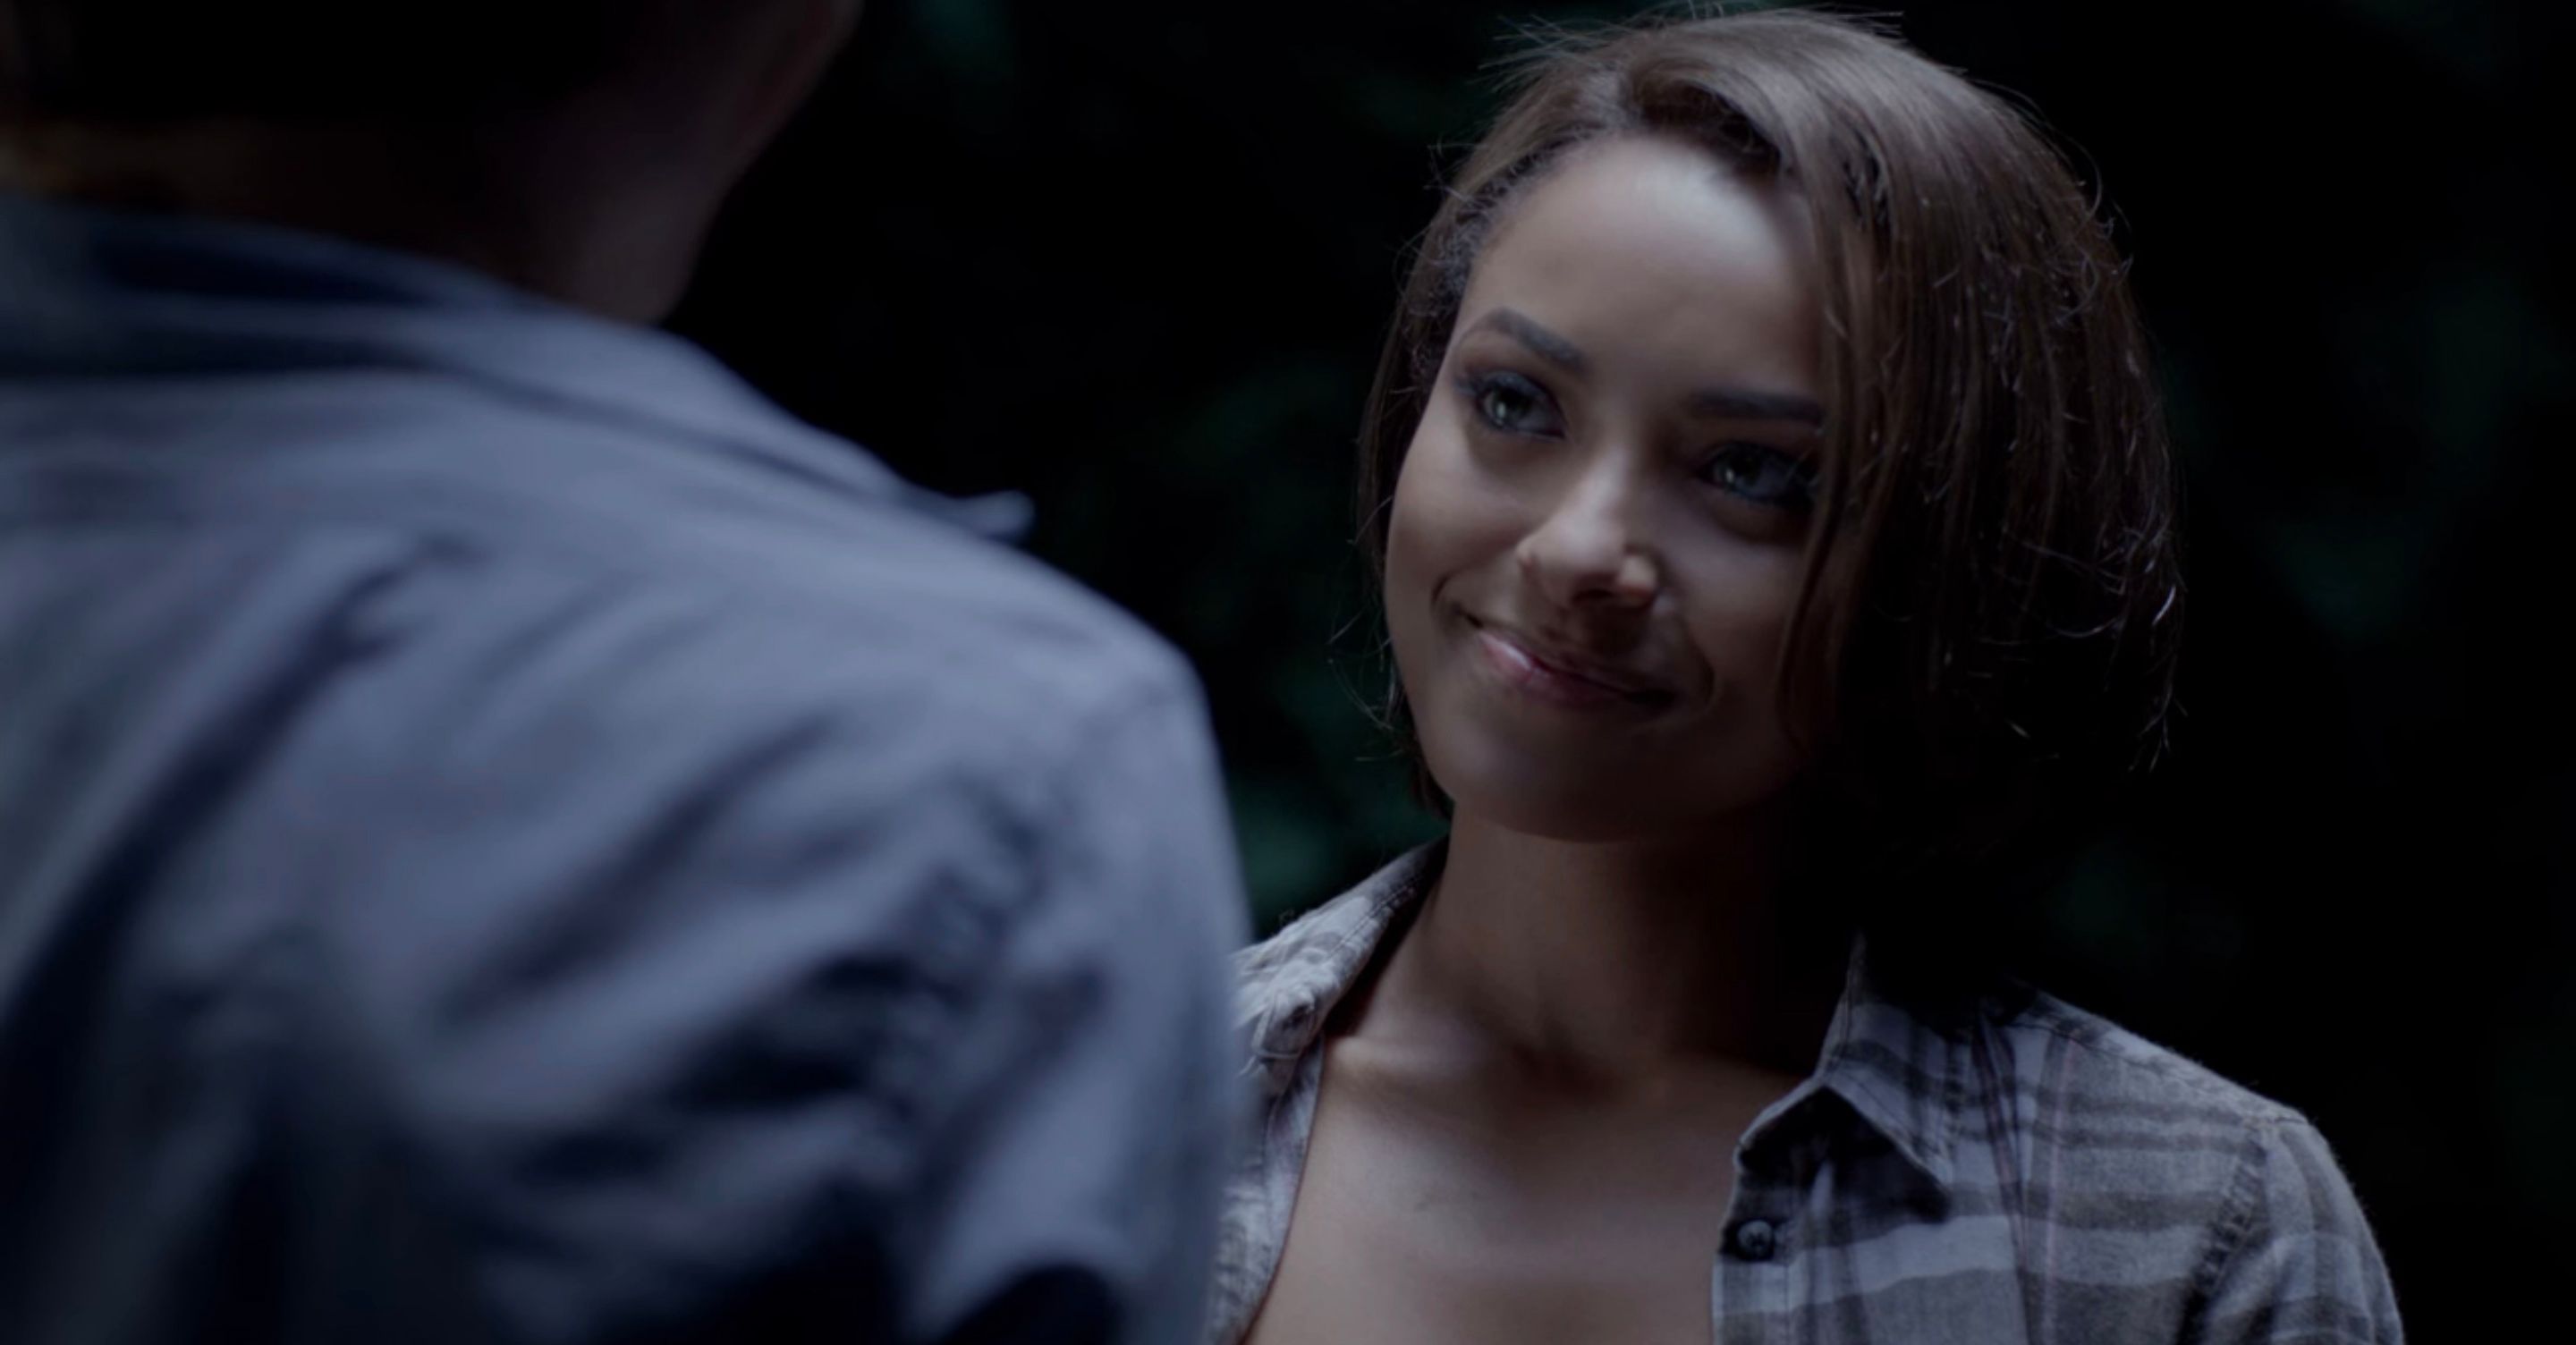 Bonnie smiling at Damon in The Vampire Diaries.